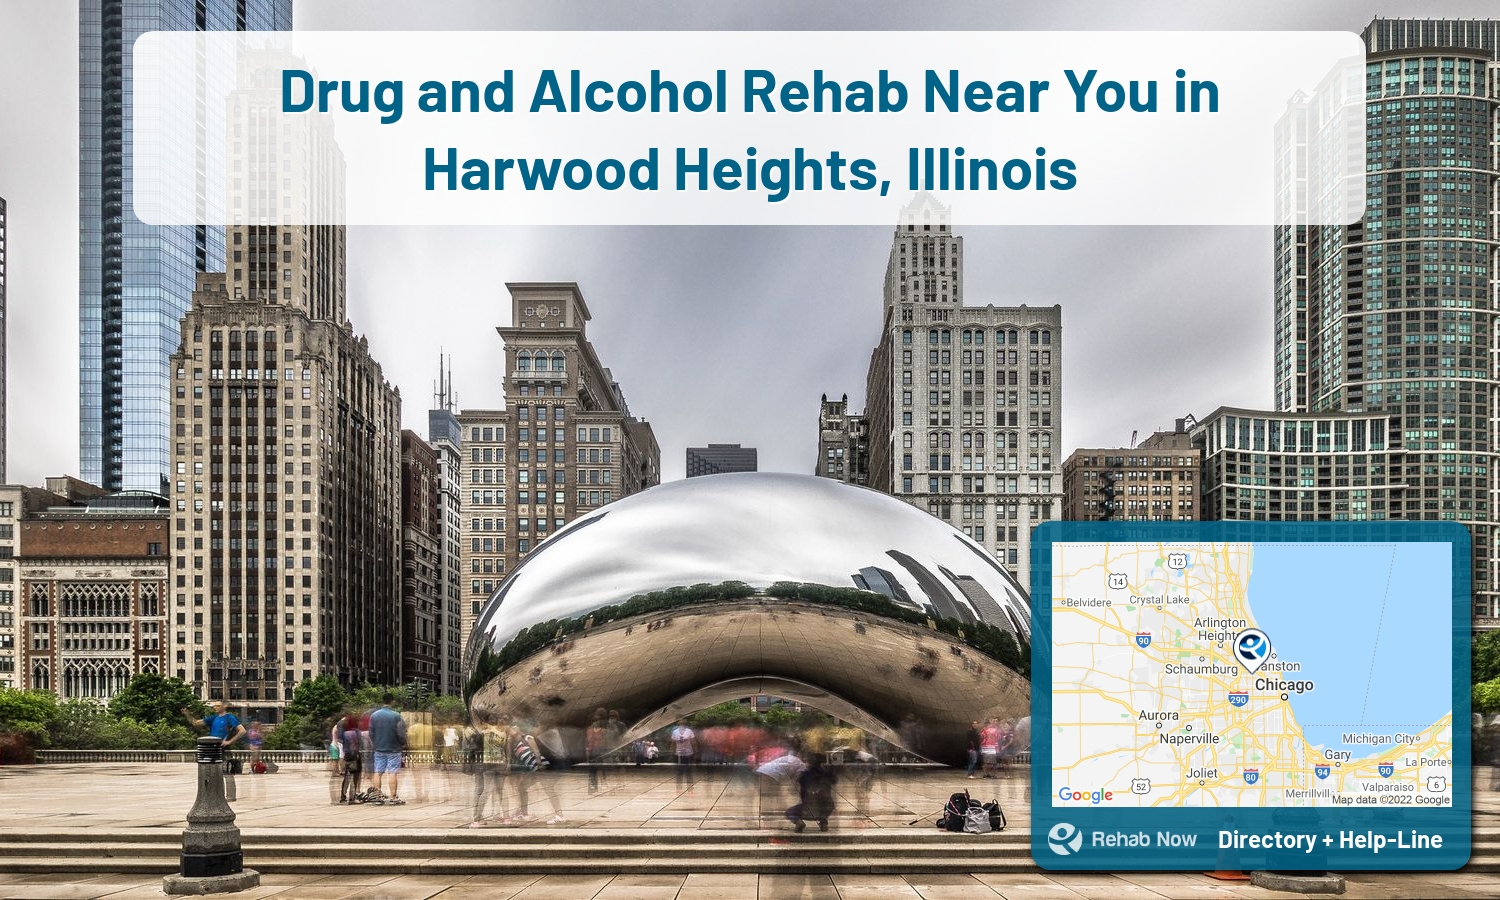 Our experts can help you find treatment now in Harwood Heights, Illinois. We list drug rehab and alcohol centers in Illinois.